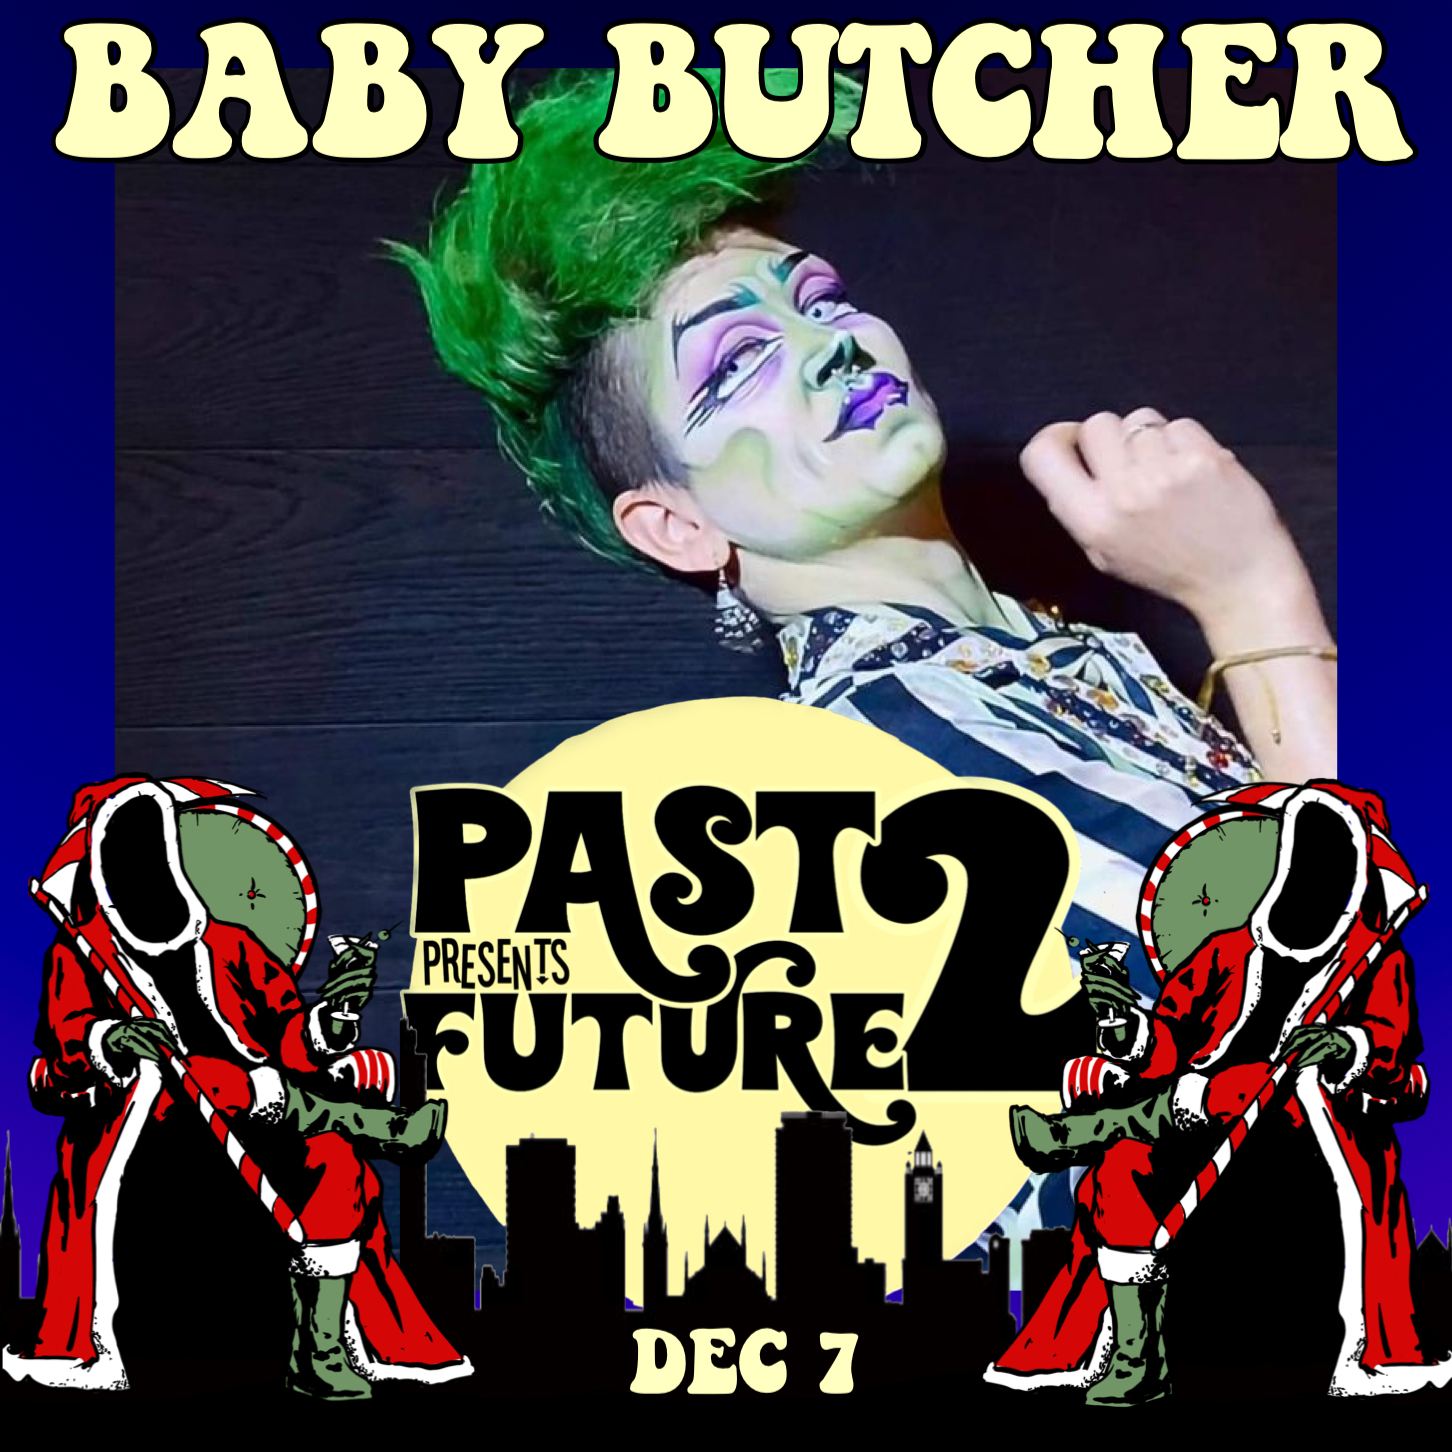 baby butcher at past presents future